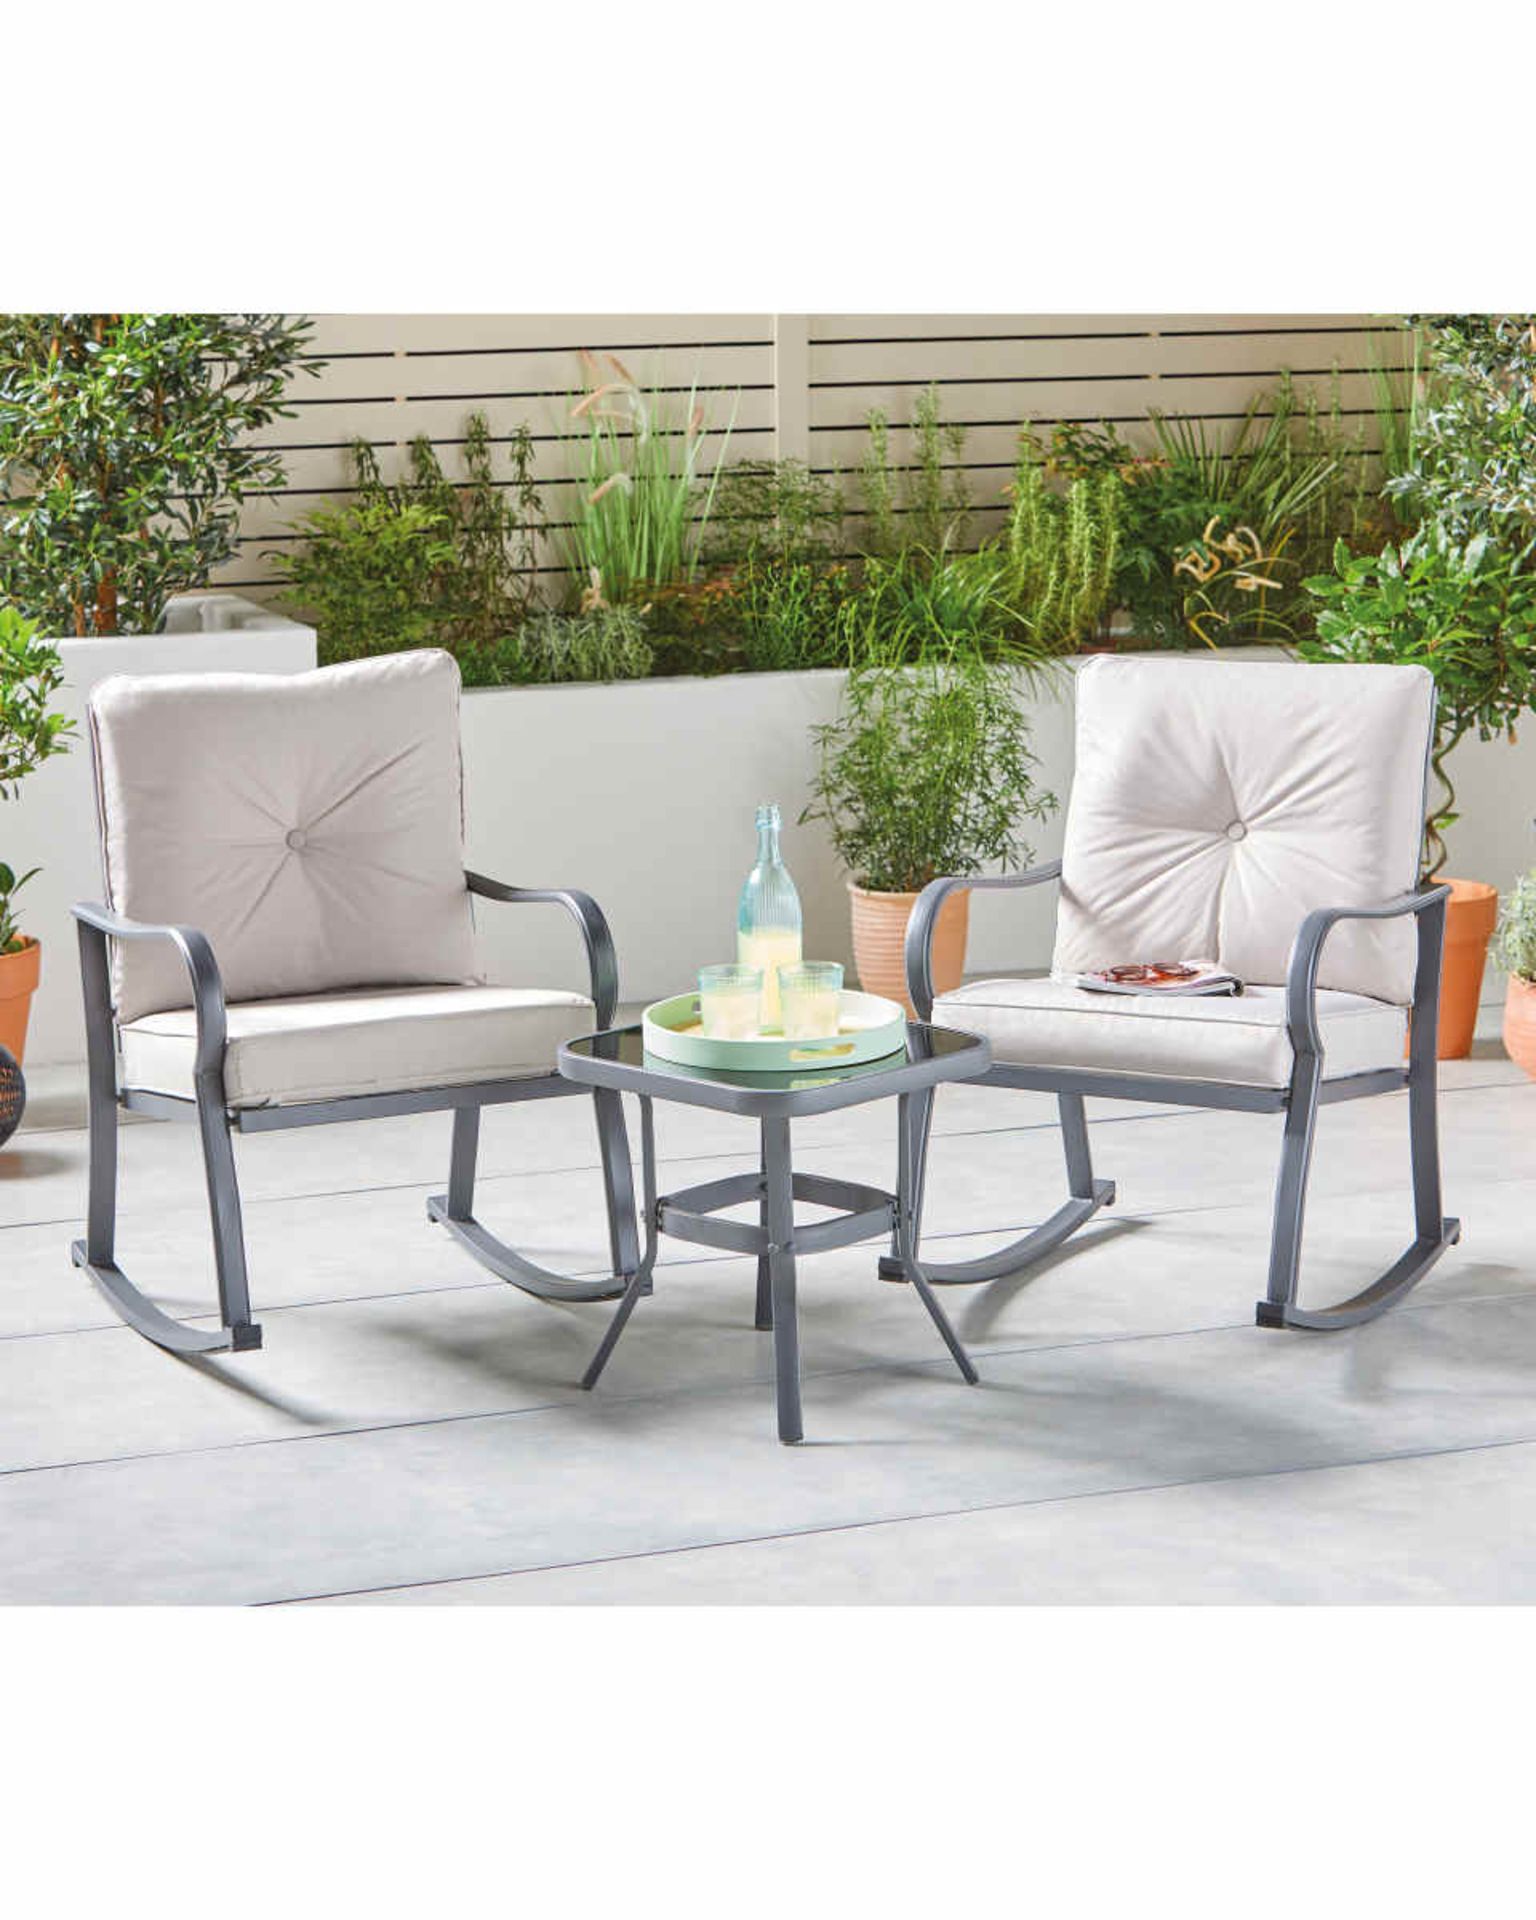 Luxury Rocking Bistro Set. Sit back and rock away in style with this stunning Luxury Rocking - Image 2 of 3